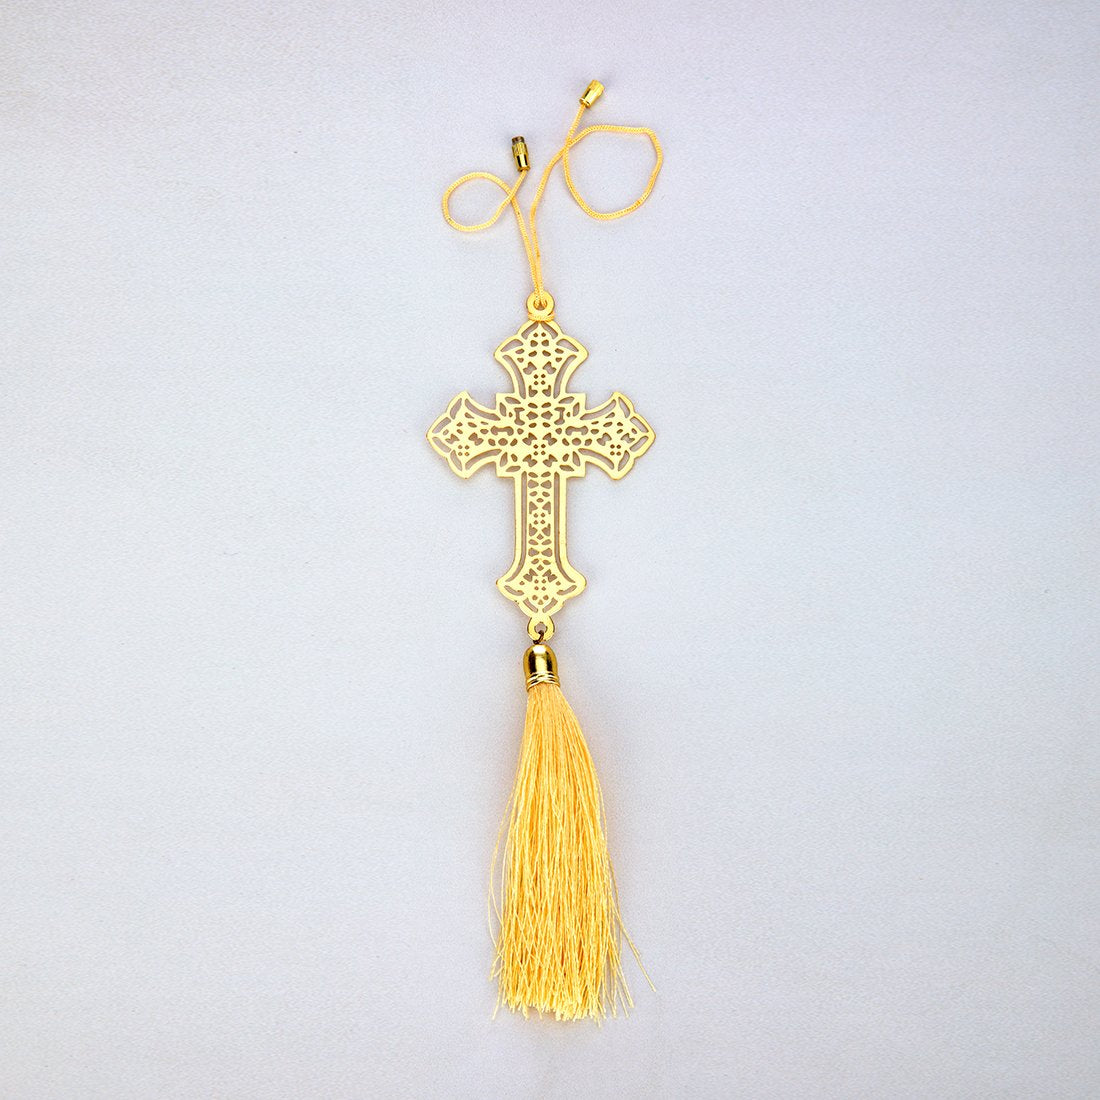 Pack of 2 - Christian Jesus Cross Hanging Accessories for Car rear view mirror Décor in Brass